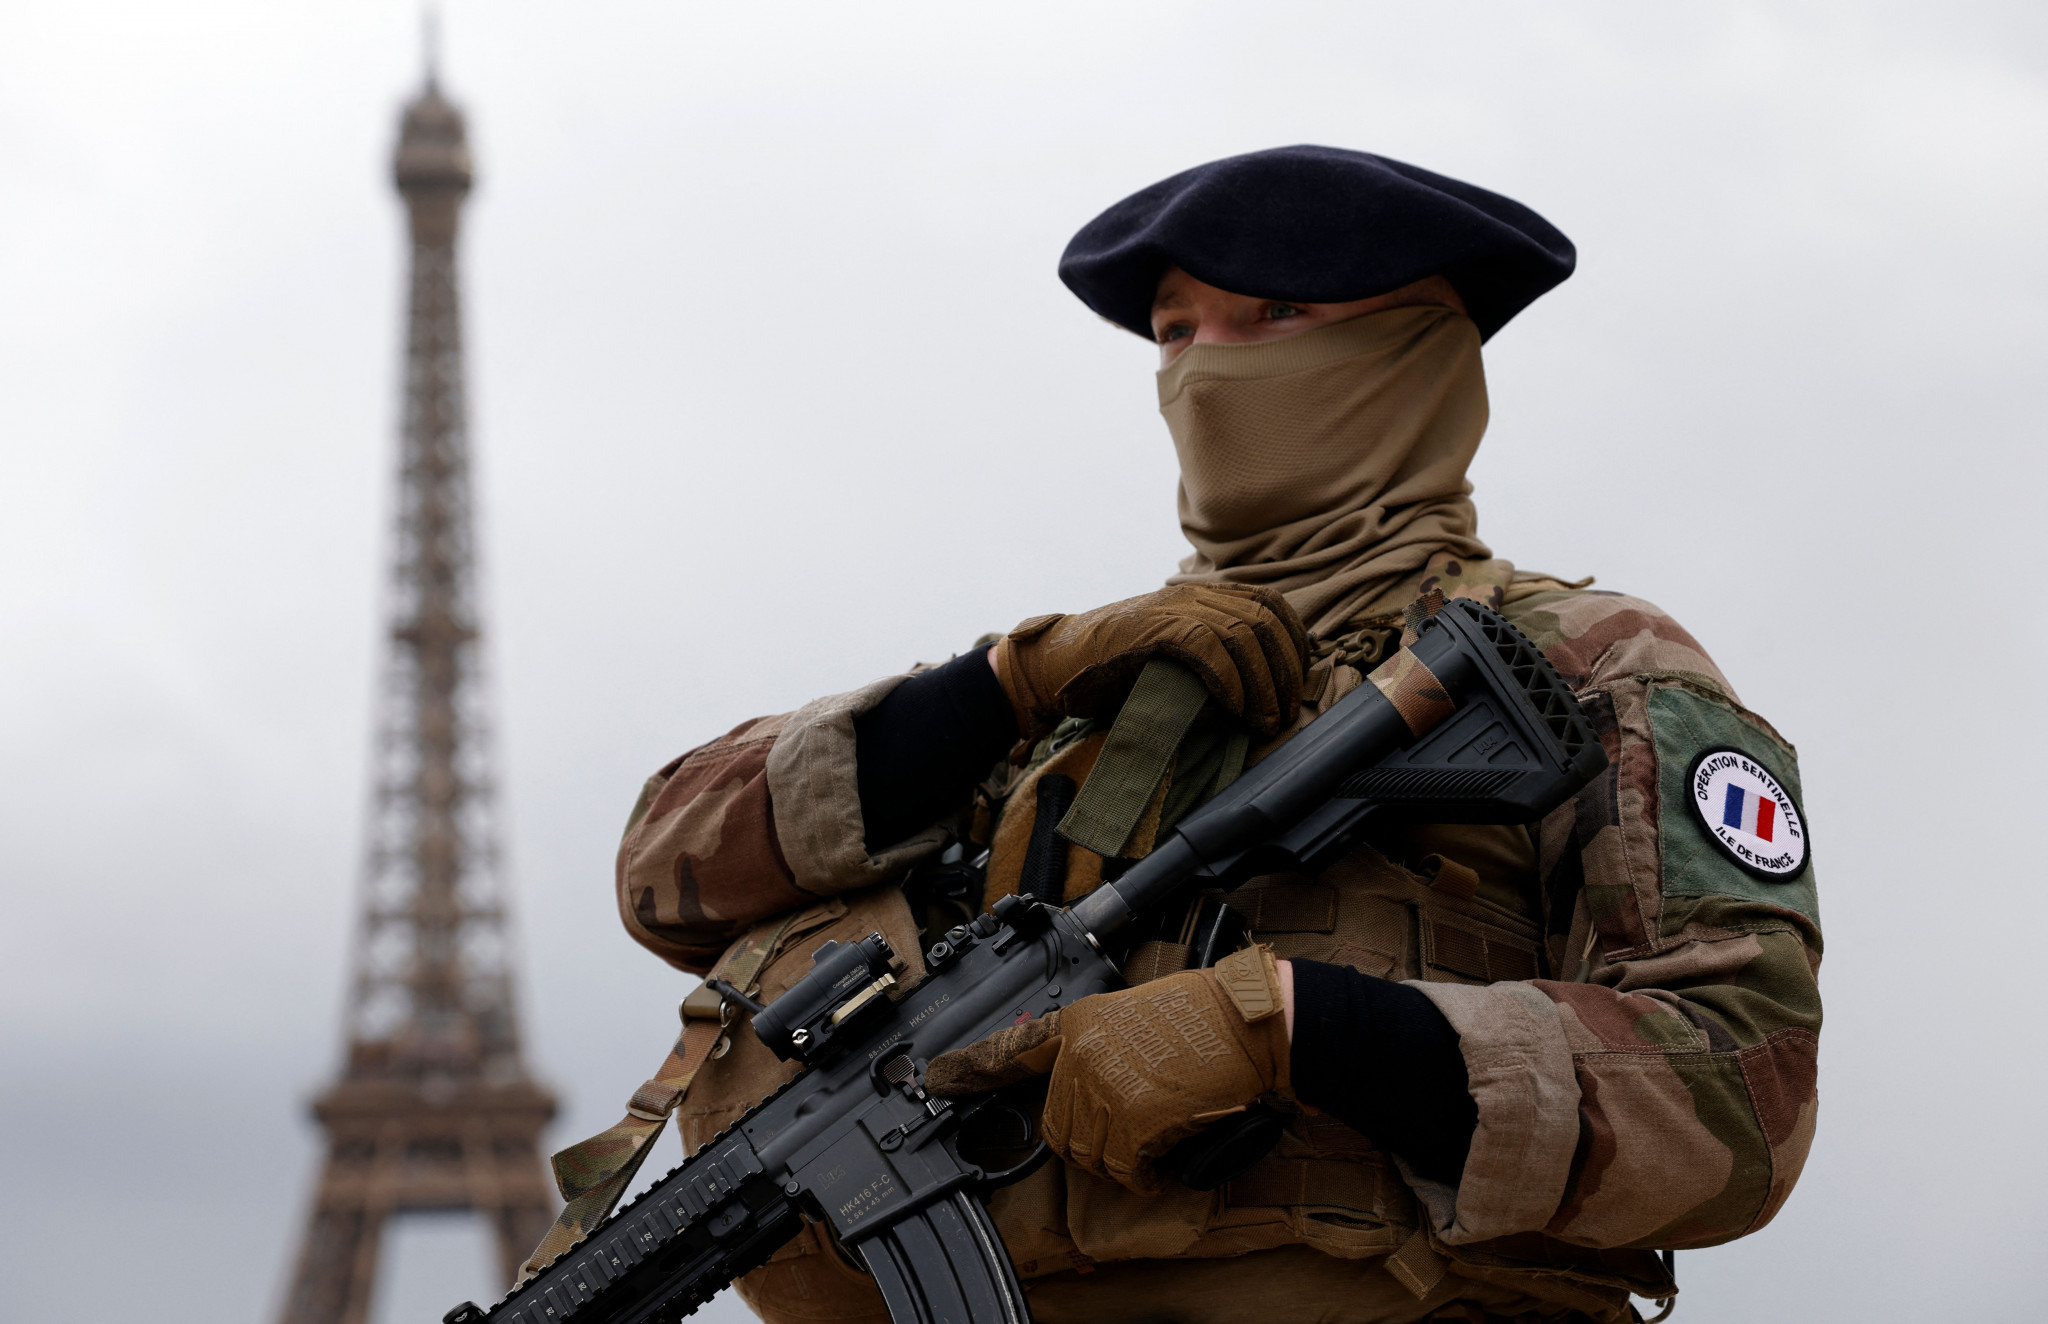 French Government to study possibility of using army reserves for Paris 2024 security